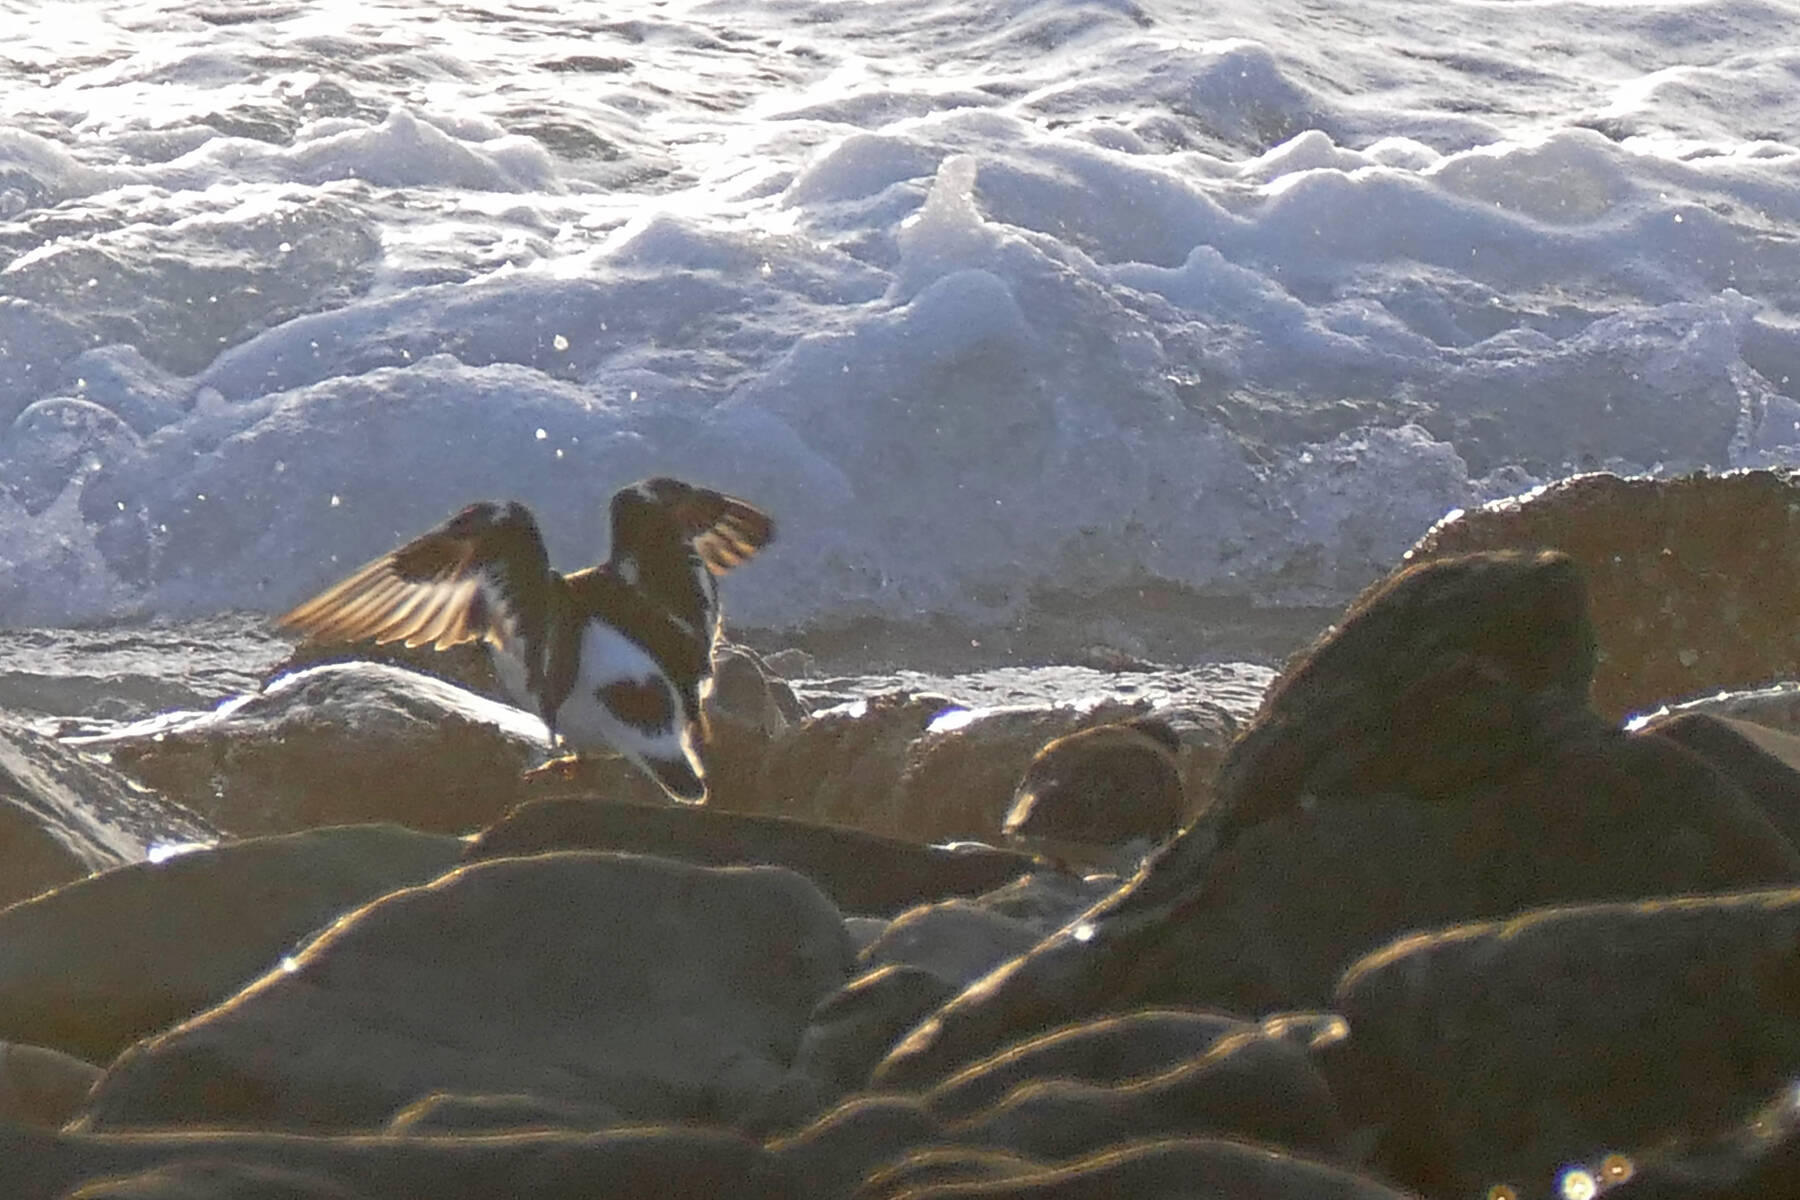 Turnstones often forage on rocky reefs near the wave action. (Courtesy Photo / Bob Armstrong)